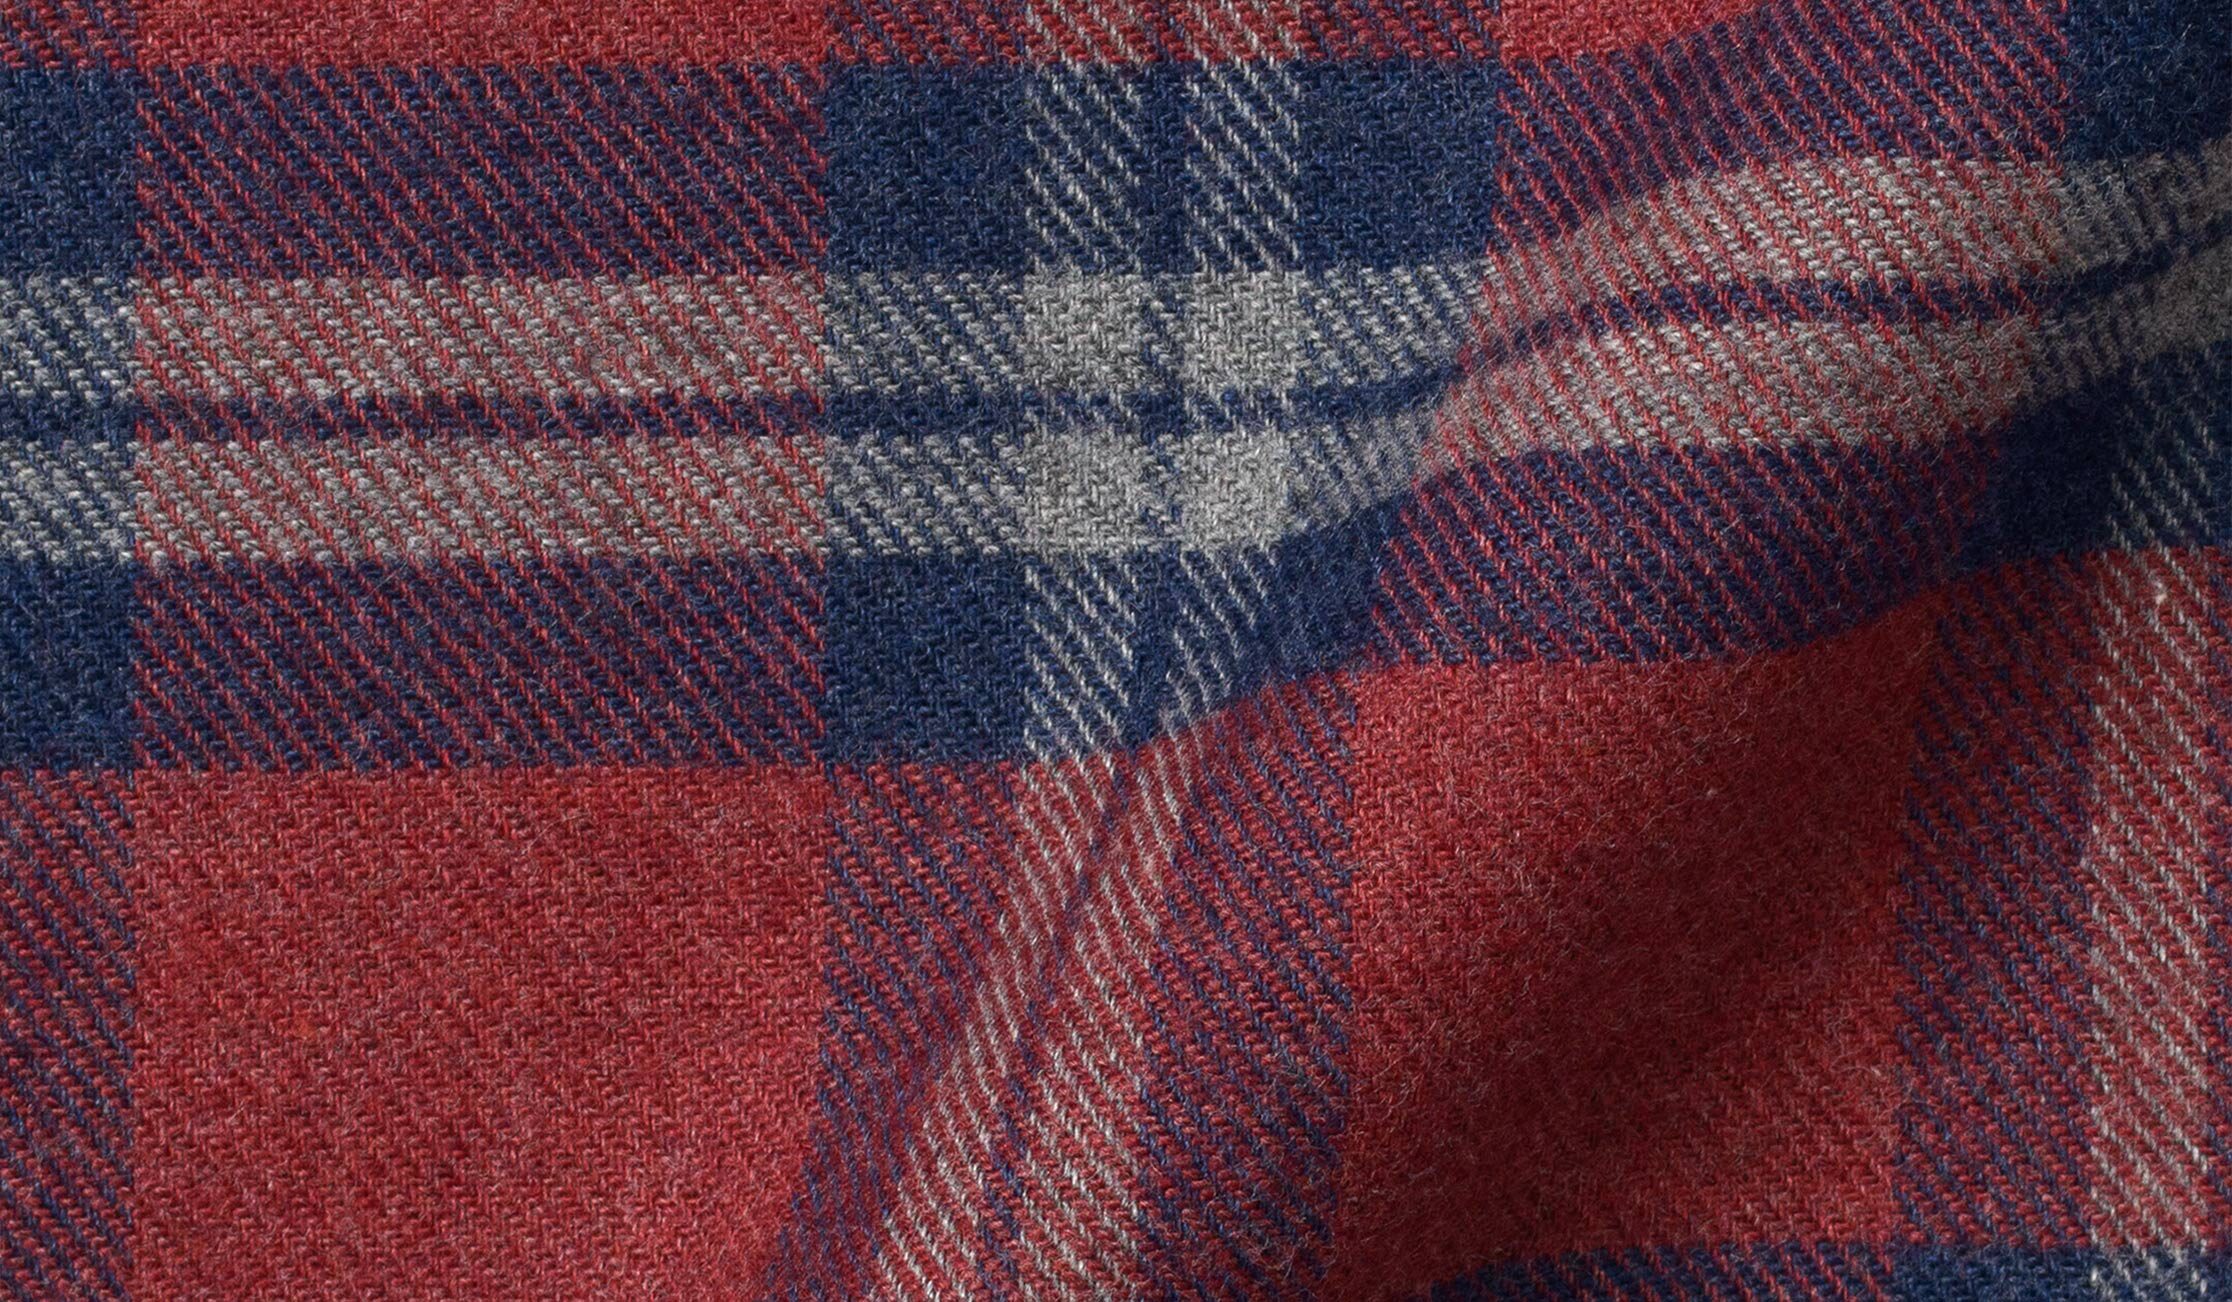 Fabric swatch of Teton Scarlet and Navy Plaid Flannel Fabric